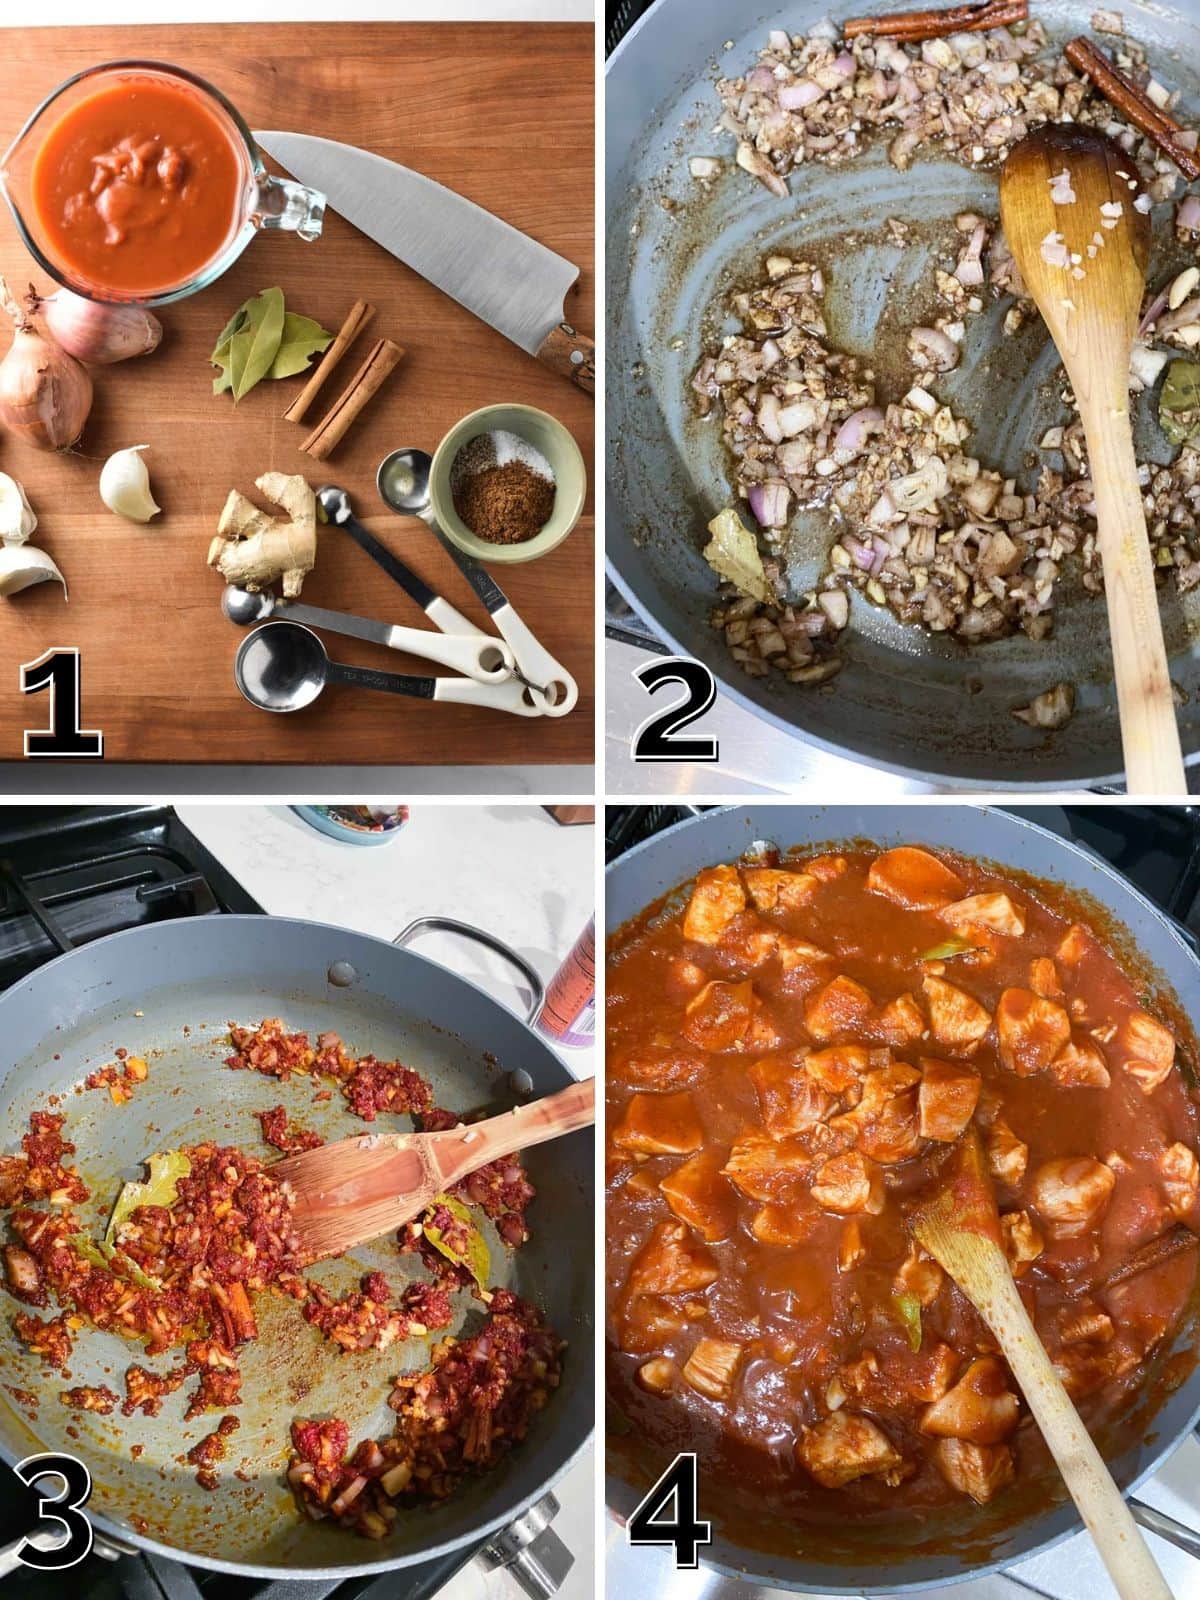 A step by step process for making chicken ruby curry from ingredients, to warming spices, and adding chicken in a pan.